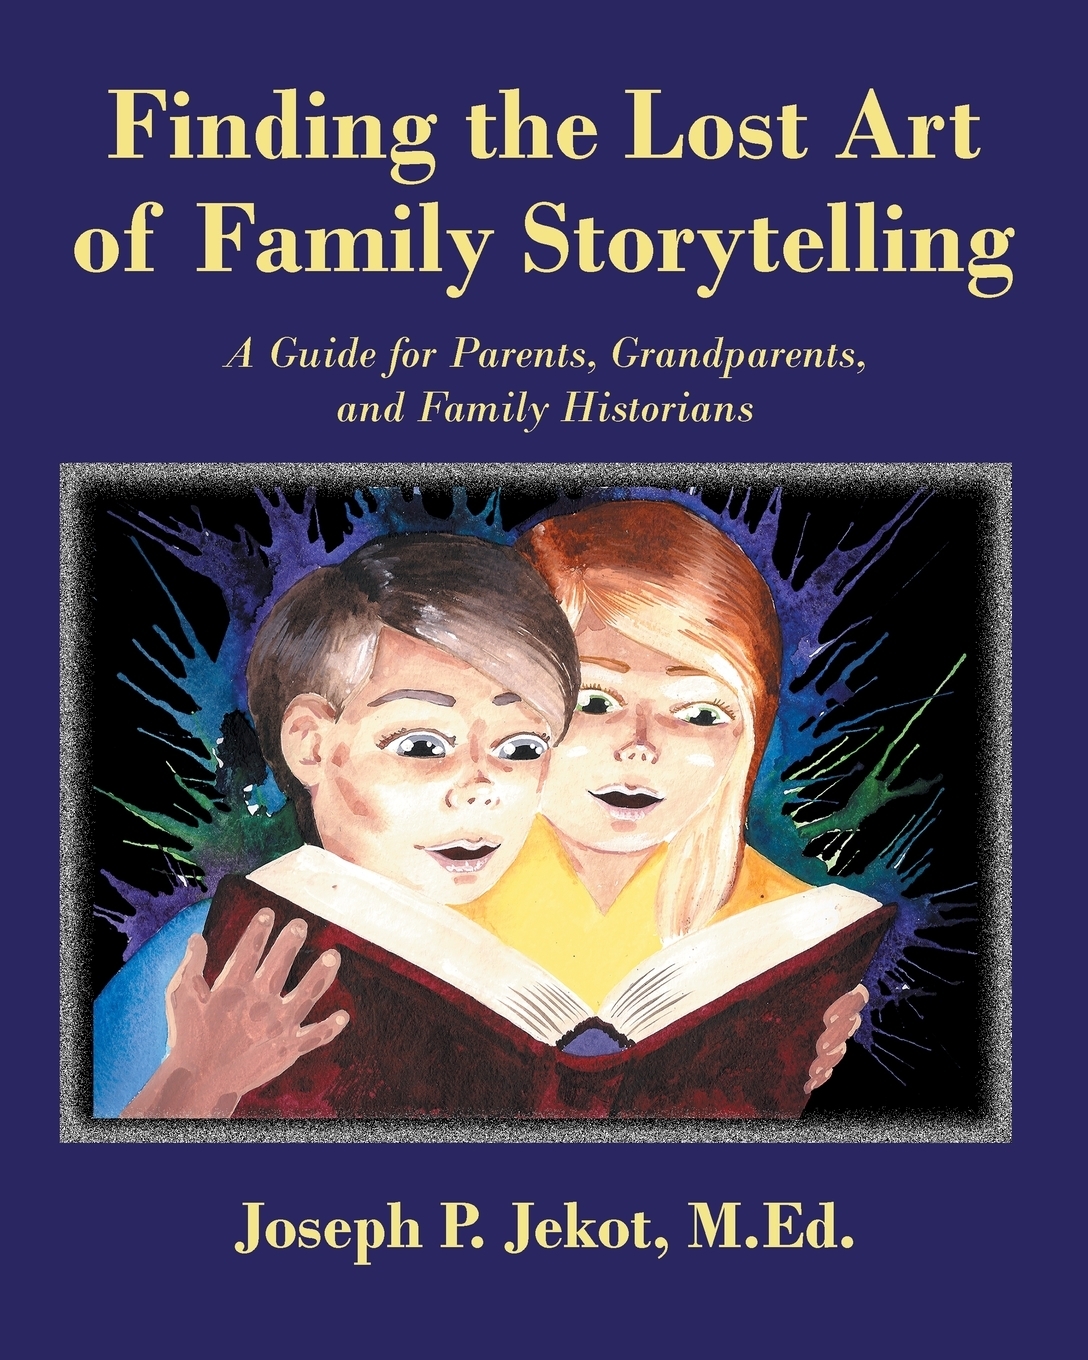 Finding the Lost Art of Family Storytelling. A Guide for Parents, Grandparents, and Family Historians